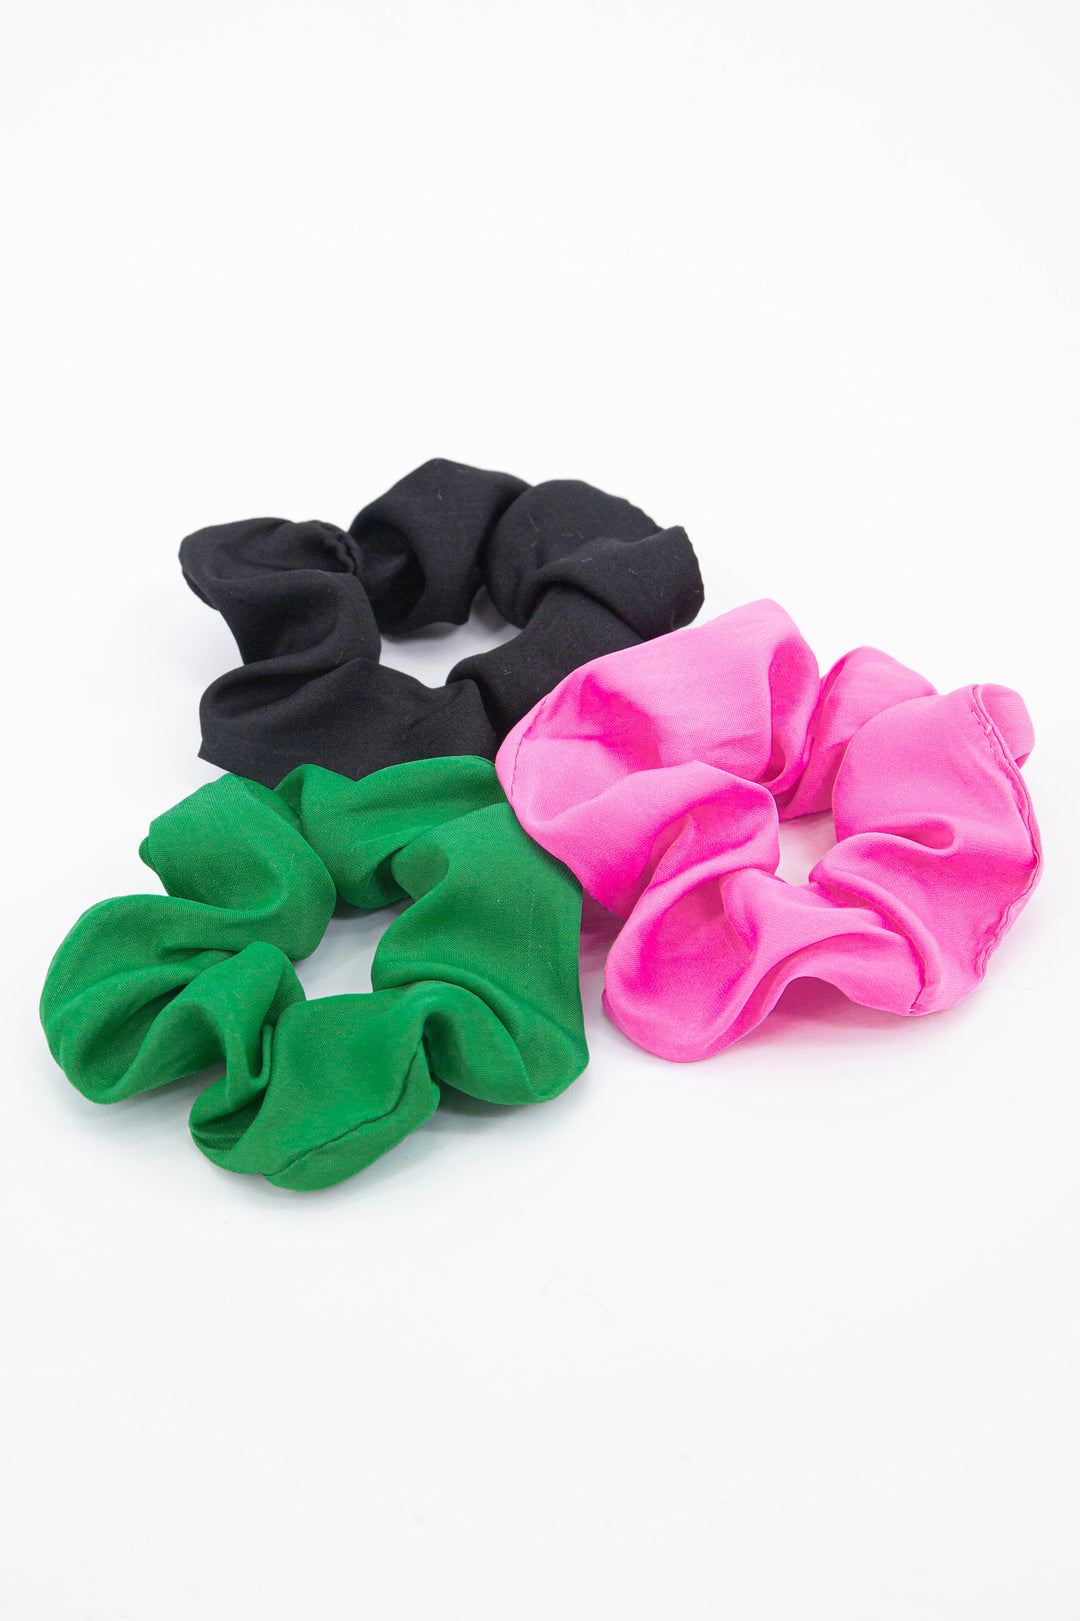 showing all three plain scrunchies in our collection, green, black and pink